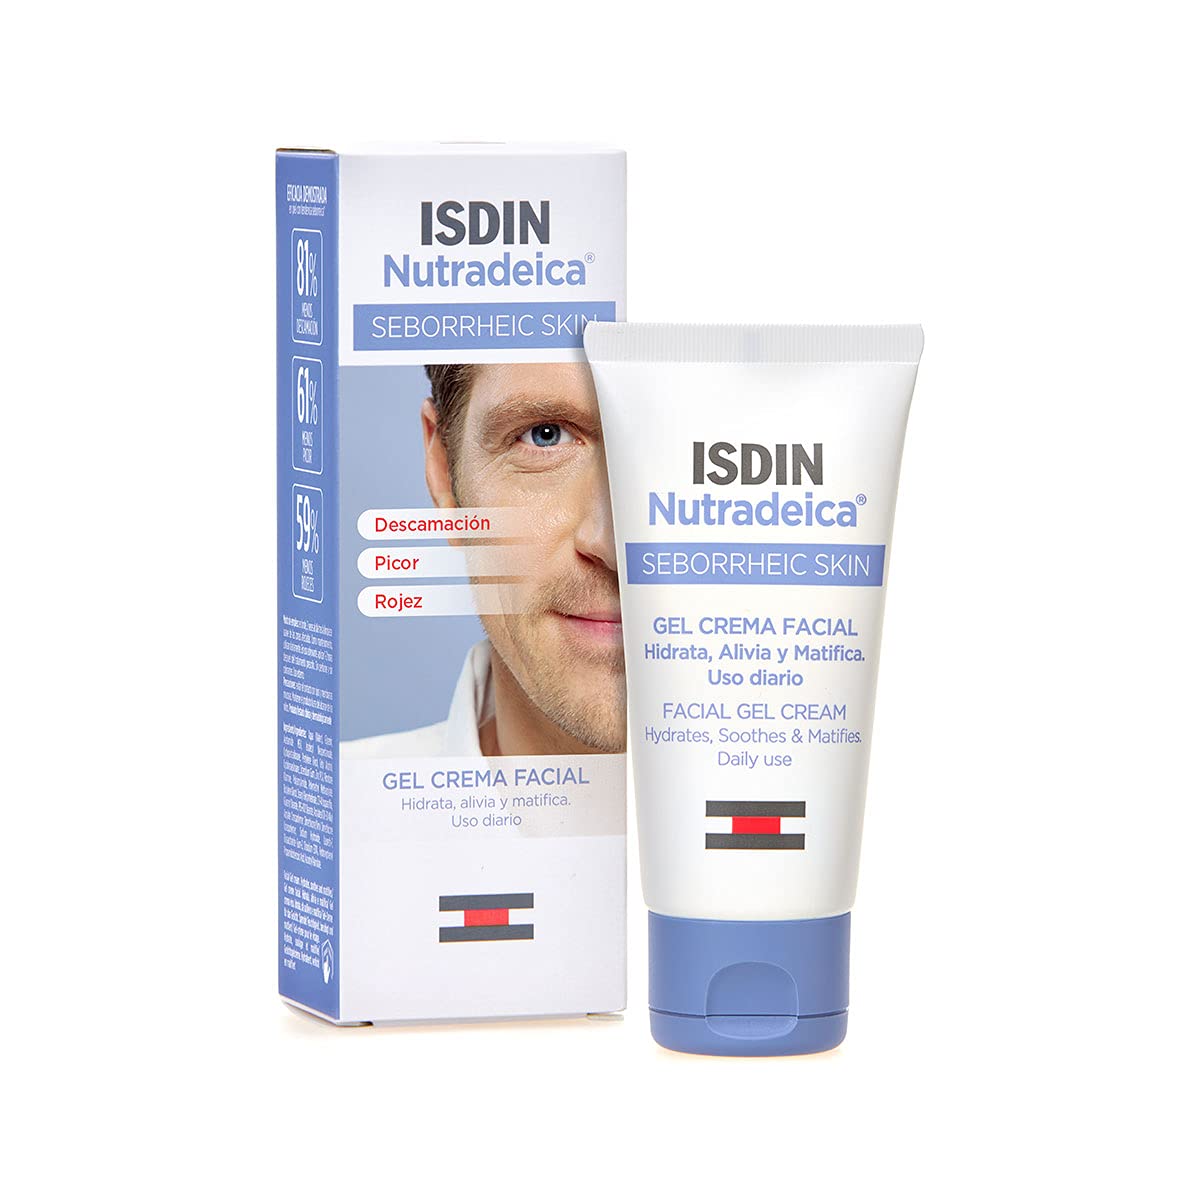 ISDIN Nutradeica Facial Gel Cream 50ml | For Seborrheic Skin | Hydrates, Soothes and Matifies skin